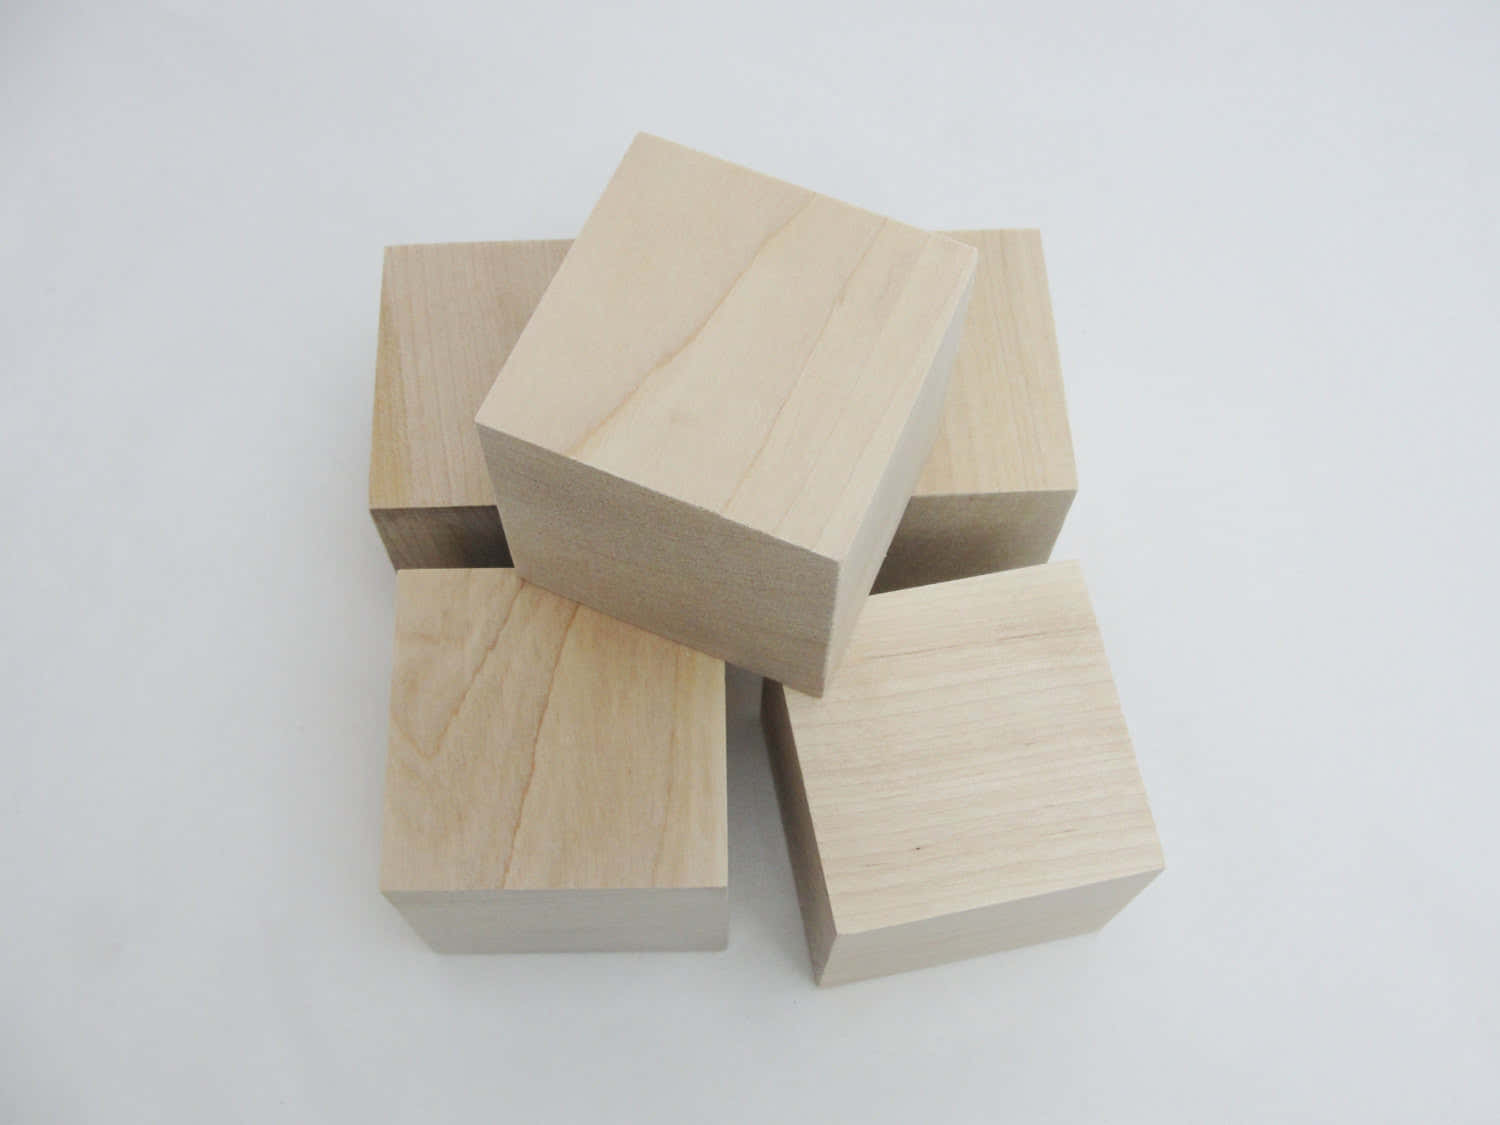 Four Wooden Cubes Stacked On Top Of Each Other